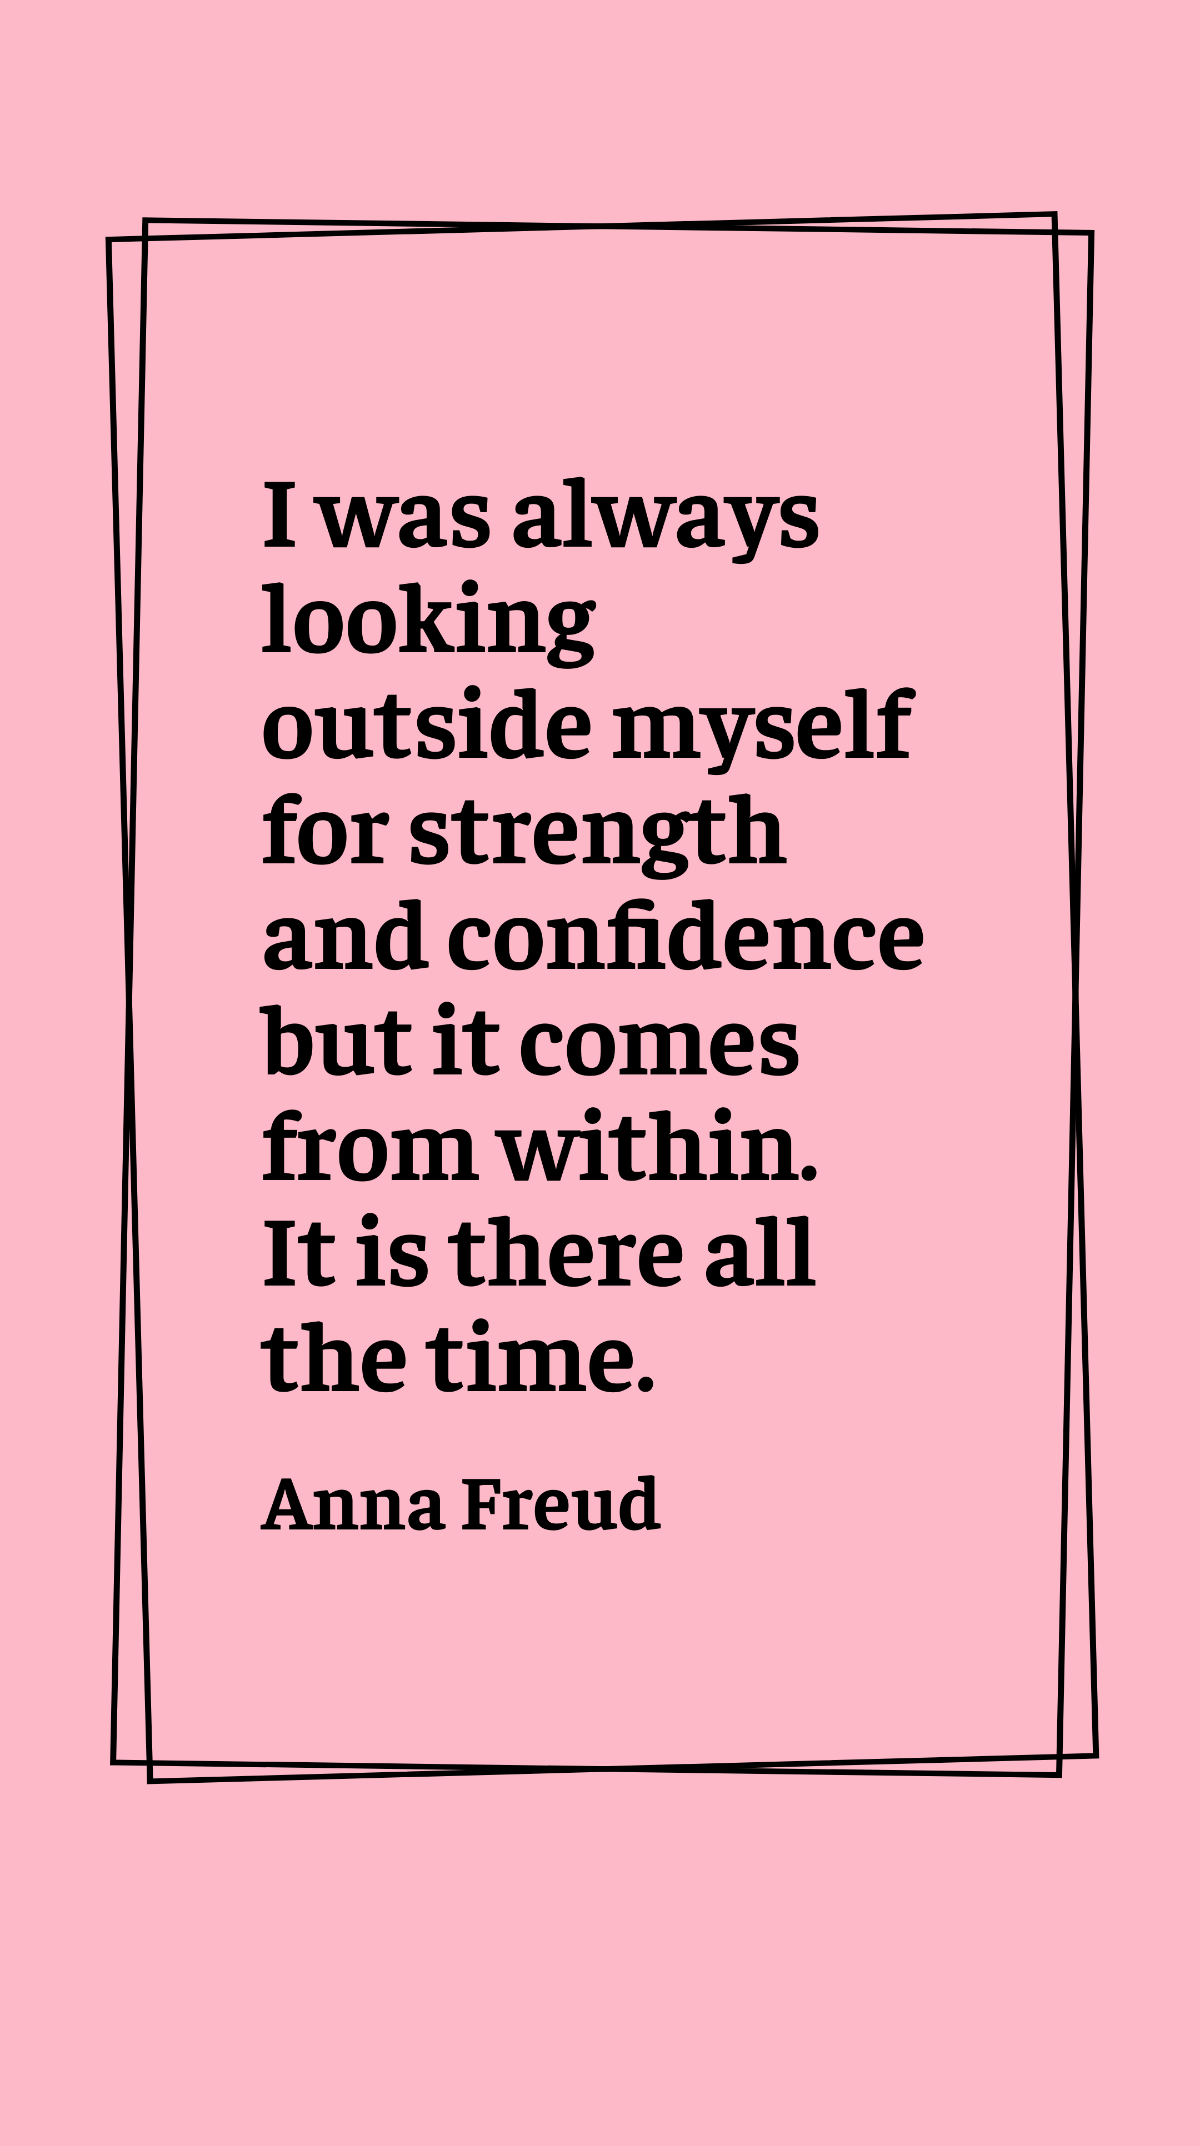 Anna Freud - I was always looking outside myself for strength and confidence but it comes from within. It is there all the time. Template